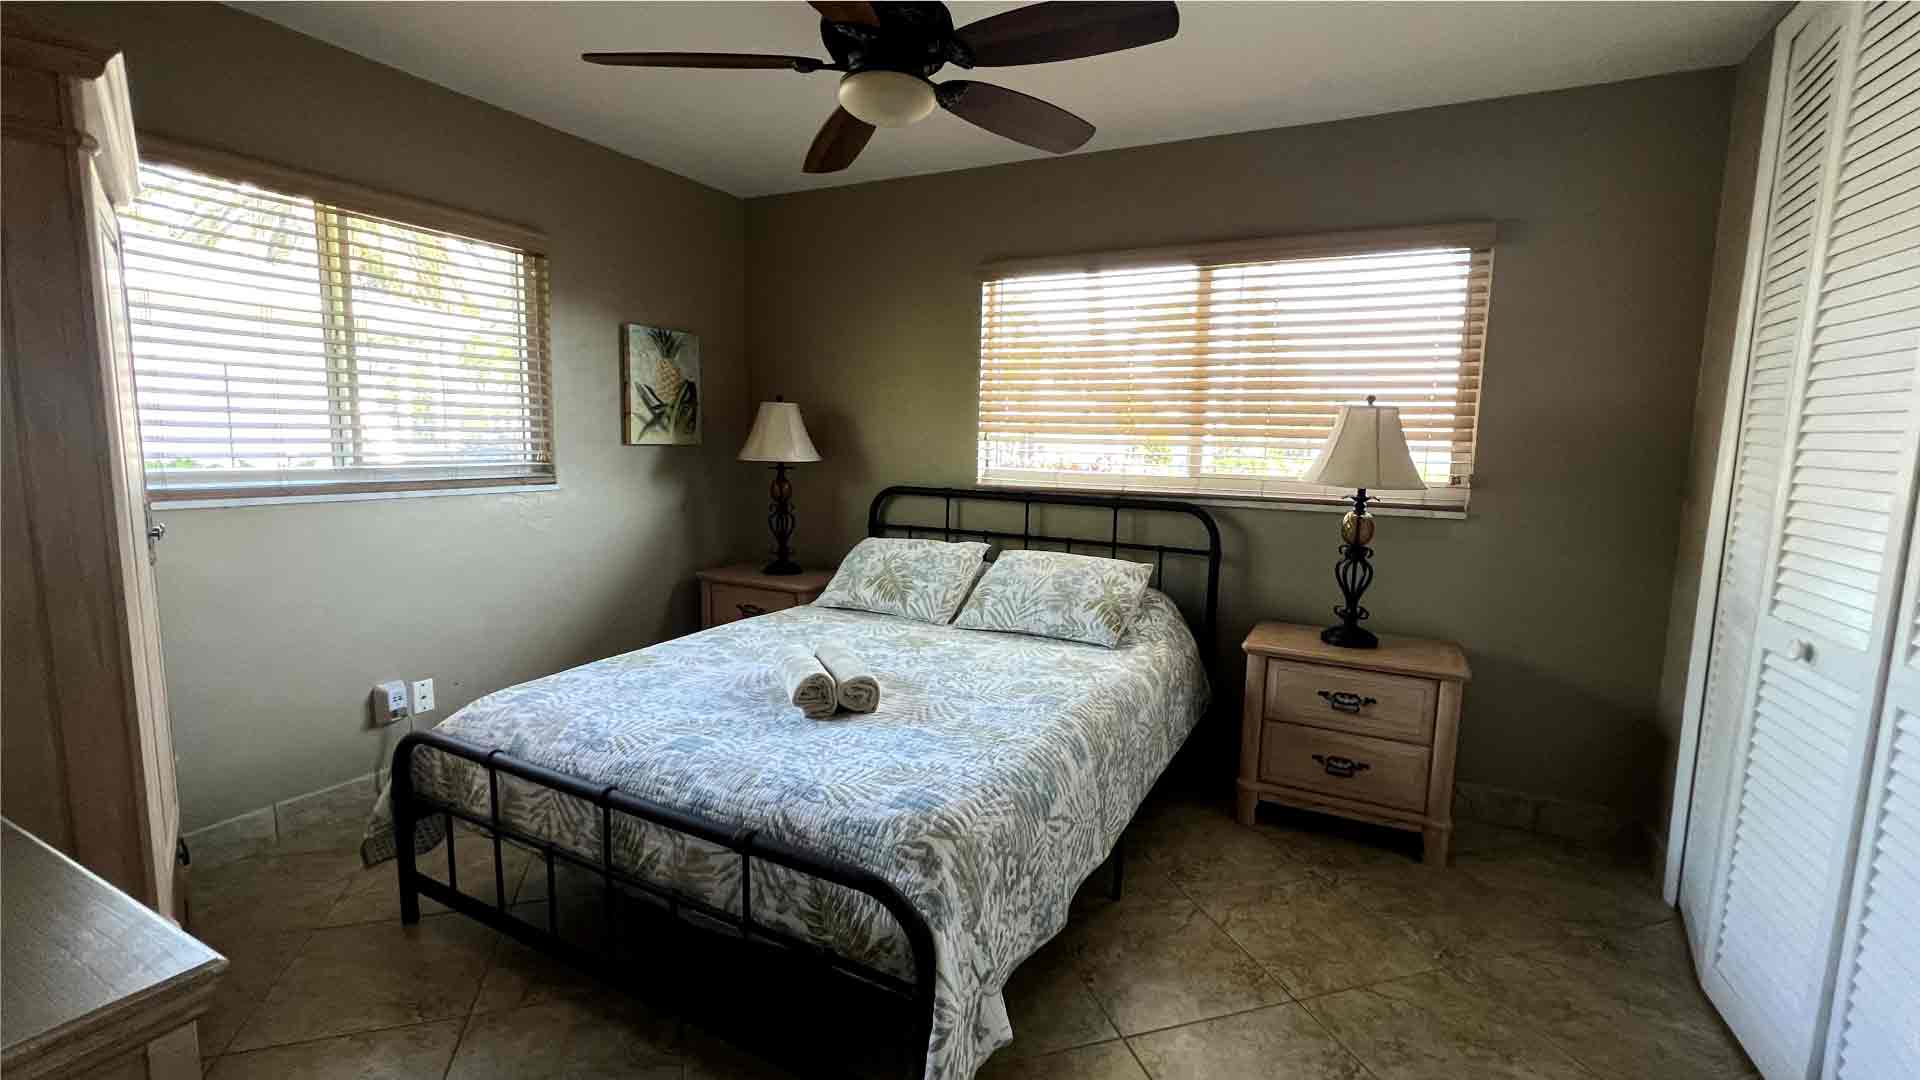 Bedroom - Regular cleaning in Cape Coral by Goldmillio - Apr 12